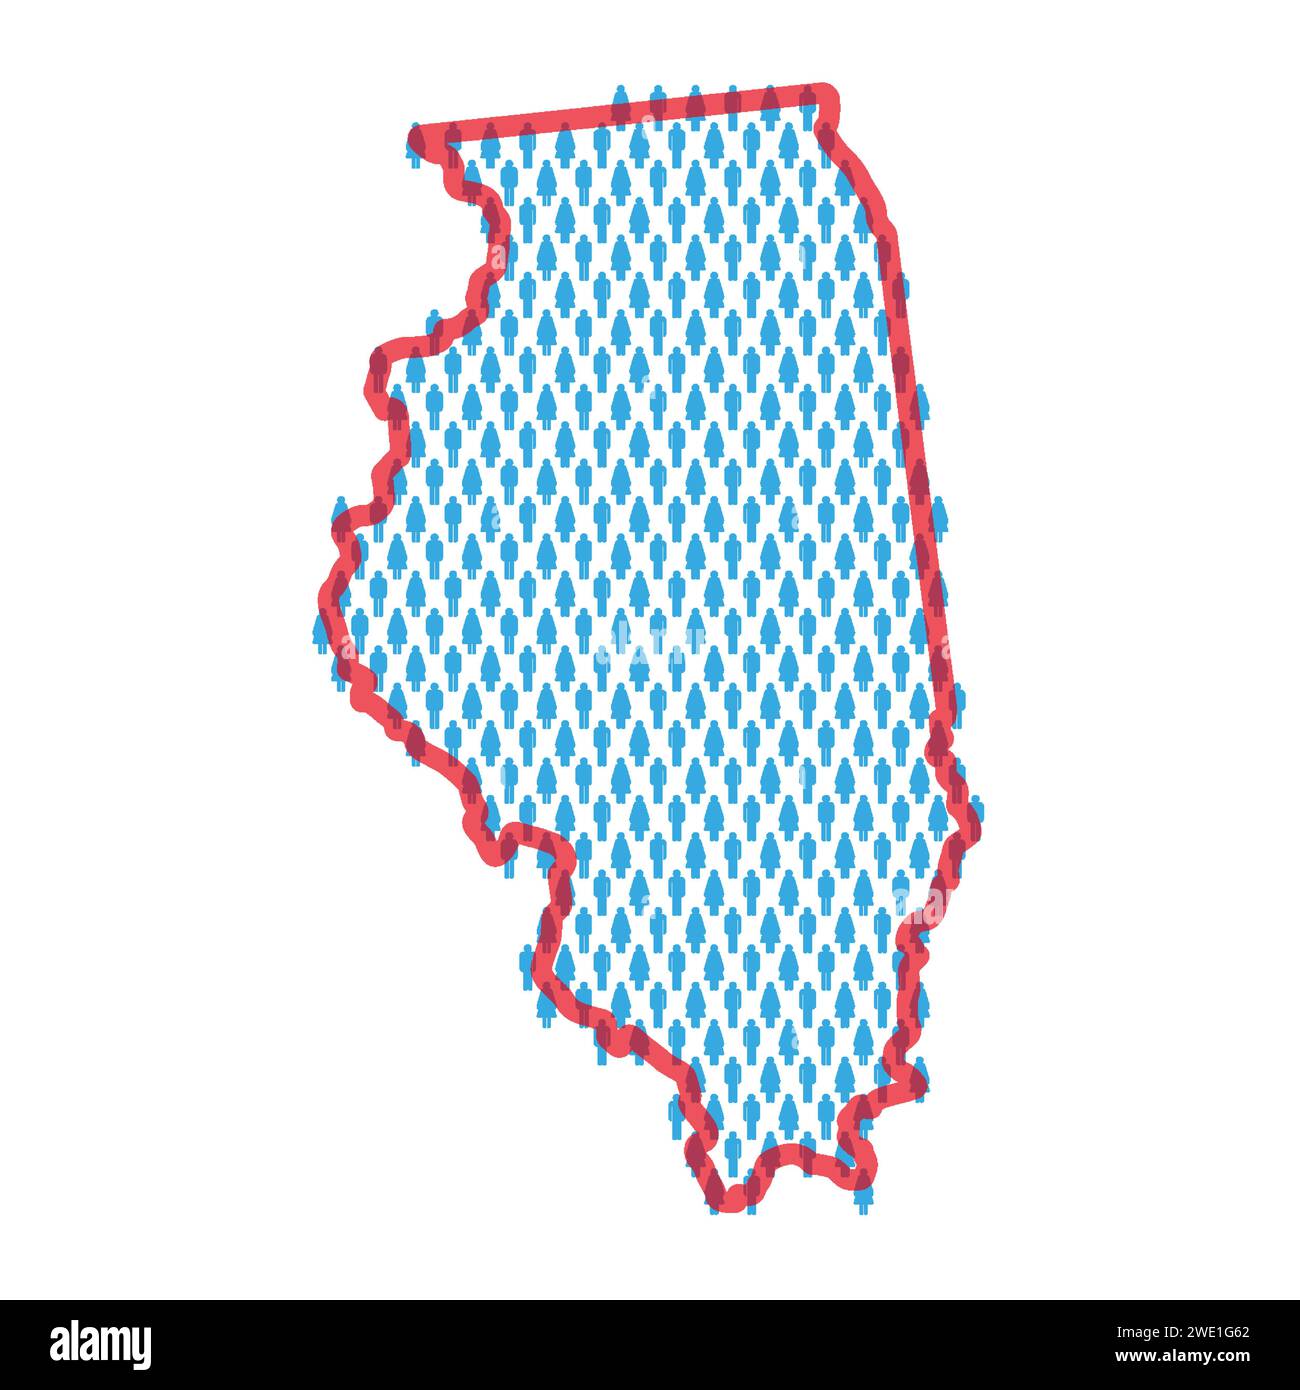 Illinois population map. Stick figures people map with bold red translucent state border. Pattern of men and women icons. Isolated vector illustration Stock Vector